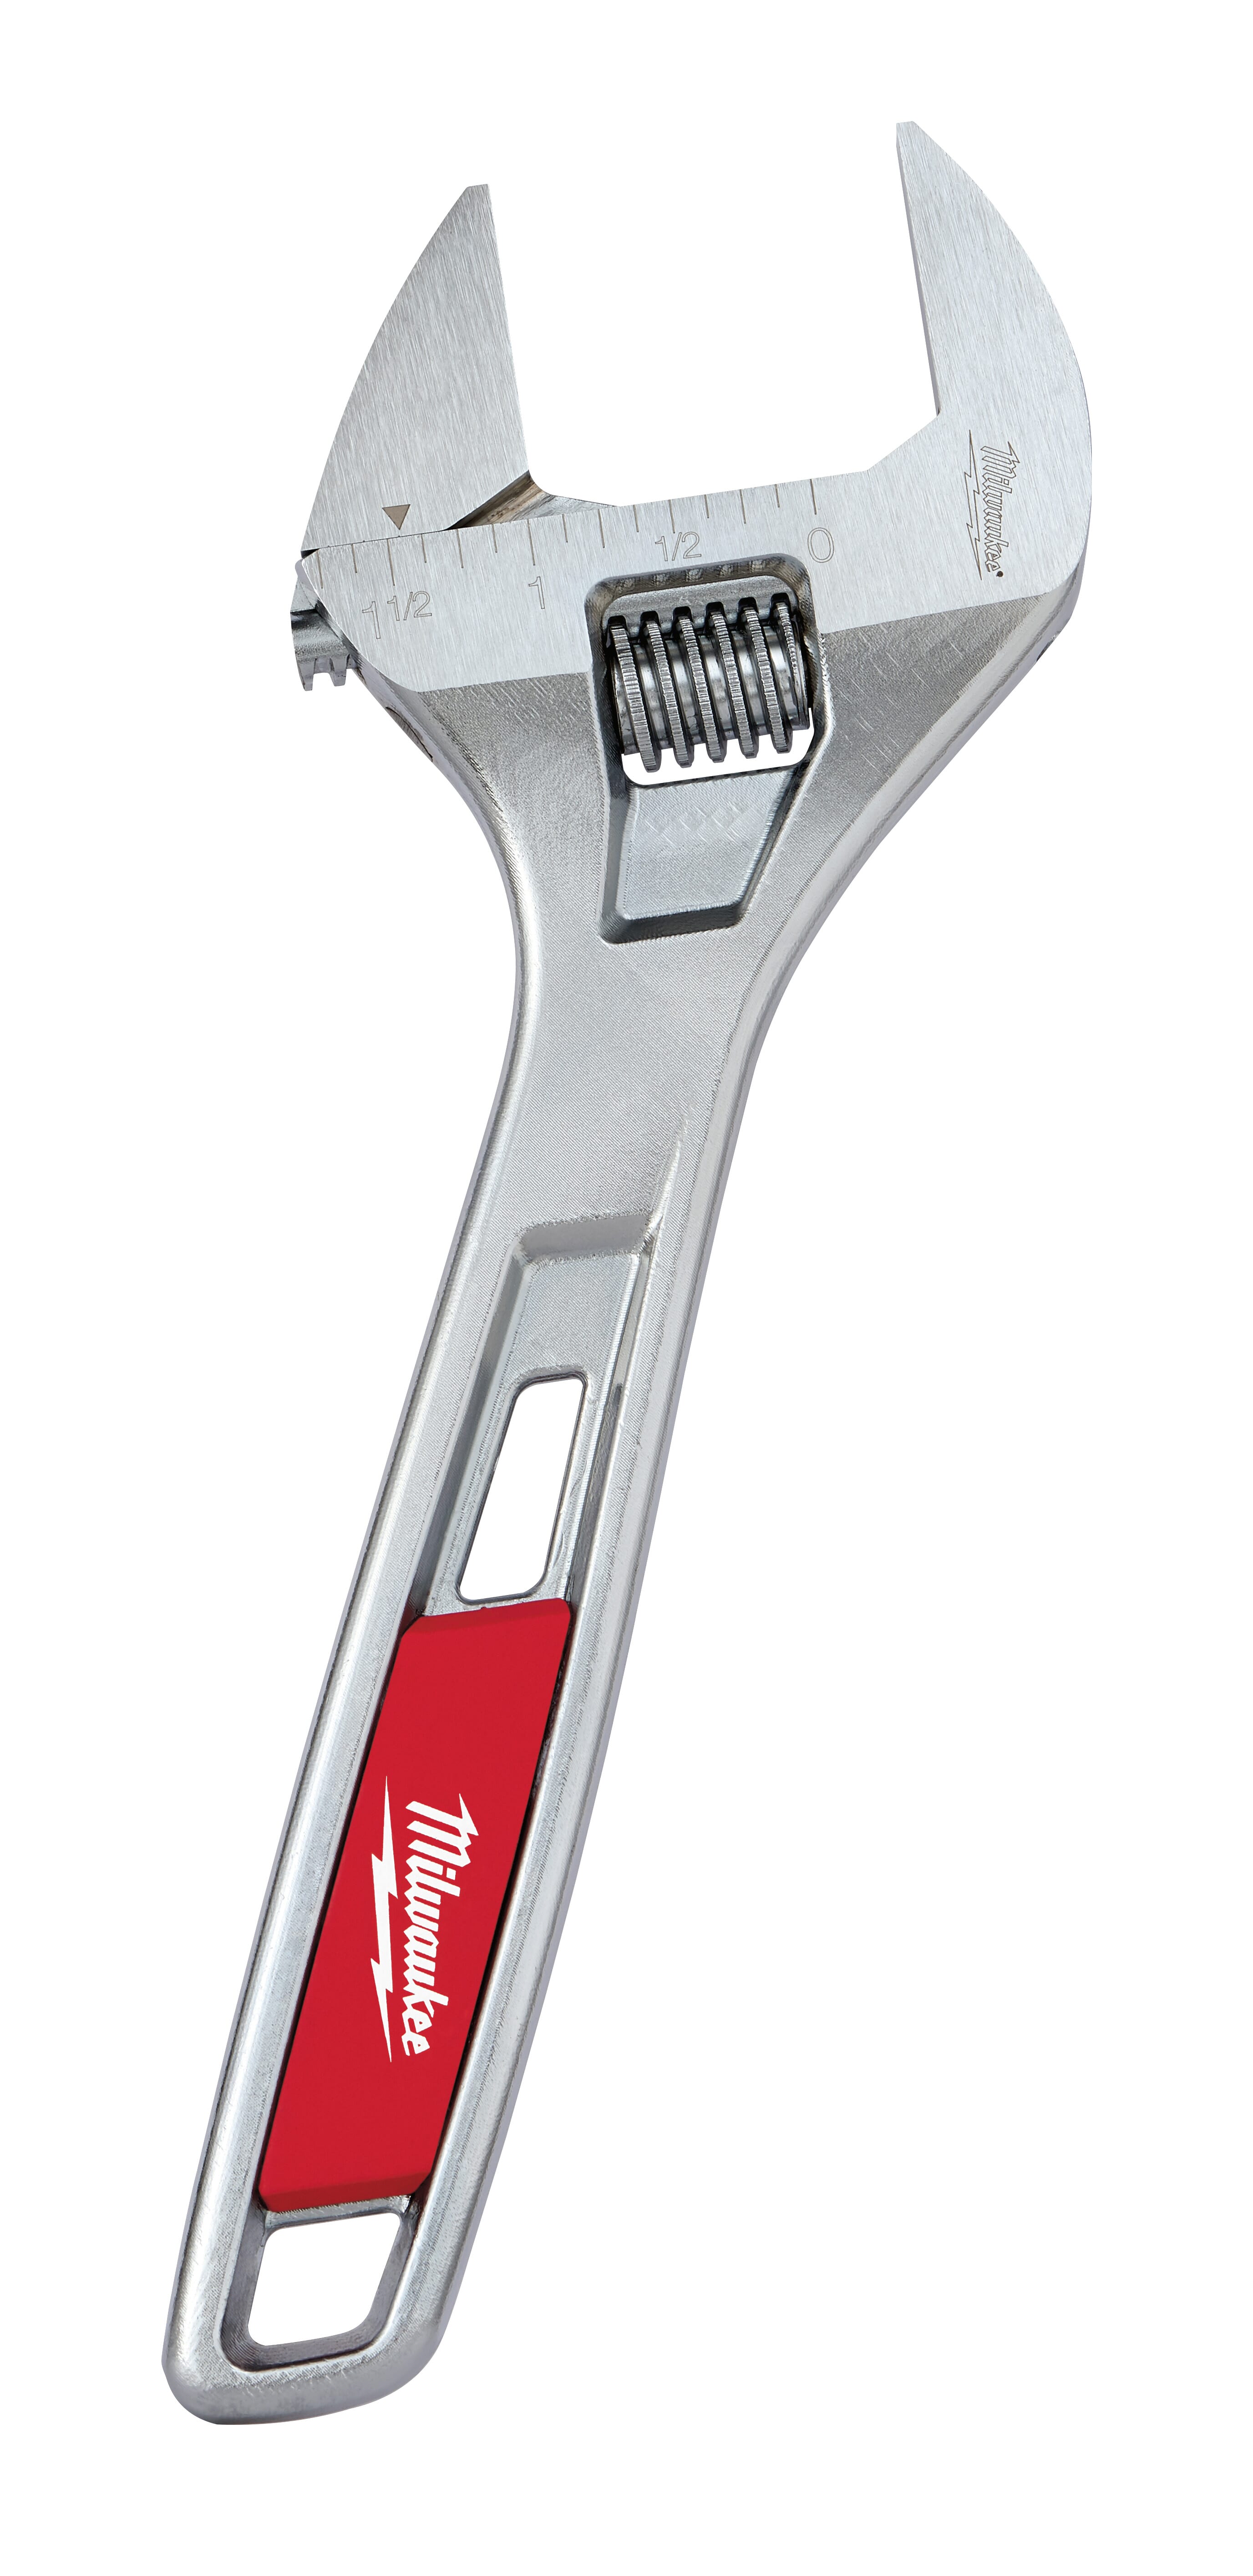 Milwaukee® 48-22-7508 Uninsulated Adjustable Wrench, 1-1/2 in, Polished Chrome, 8 in OAL, Steel Body, ASME Specified, Steel